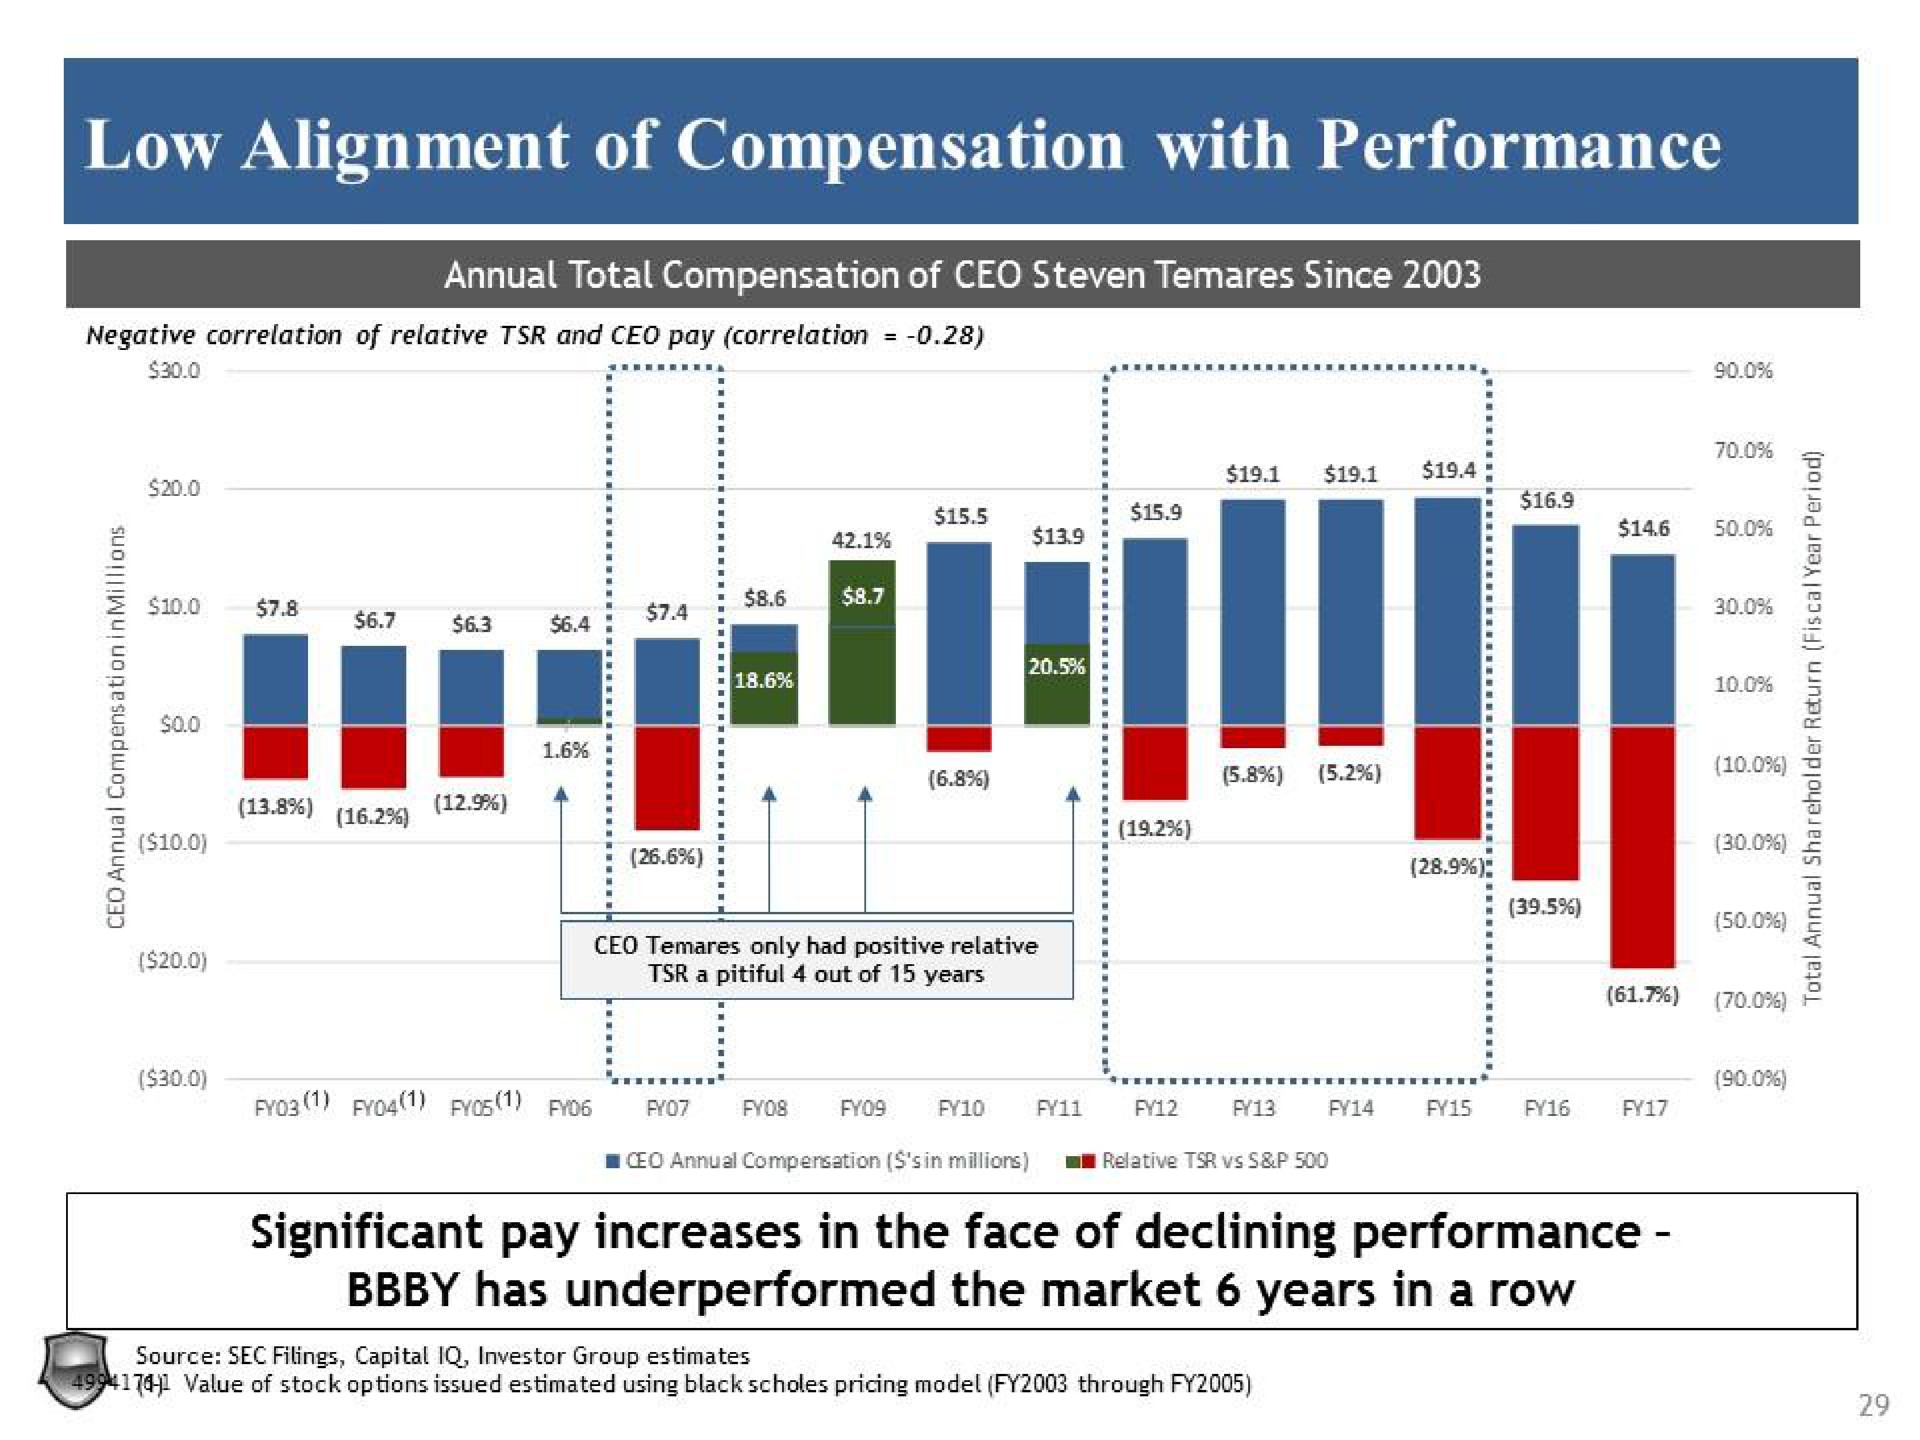 low alignment of compensation with performance significant pay increases in the face of declining performance has the market years in a row | Legion Partners